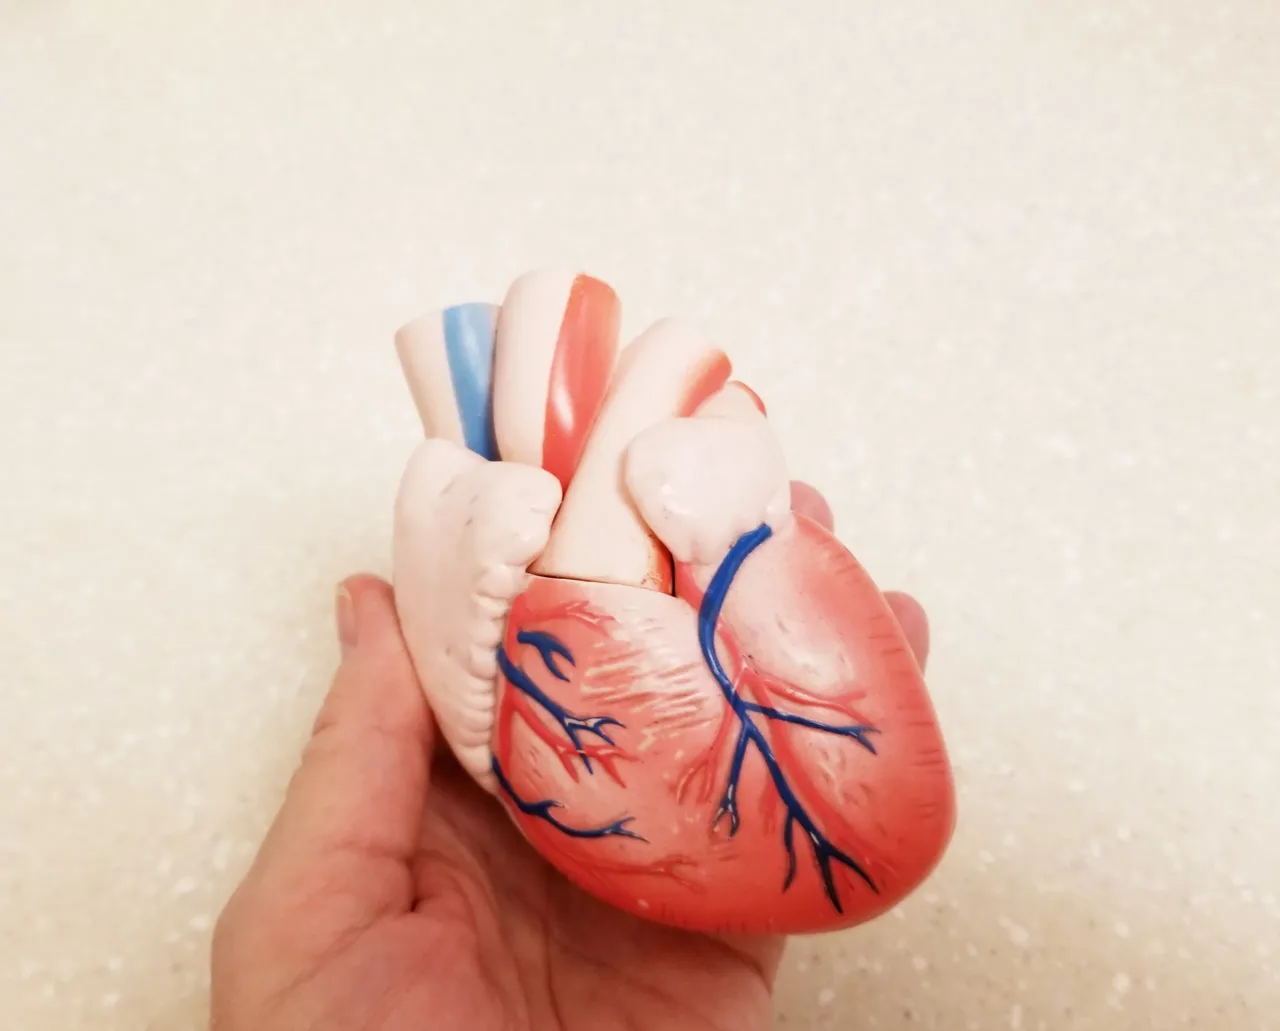 A model illustrating heart health held in a person's hand.